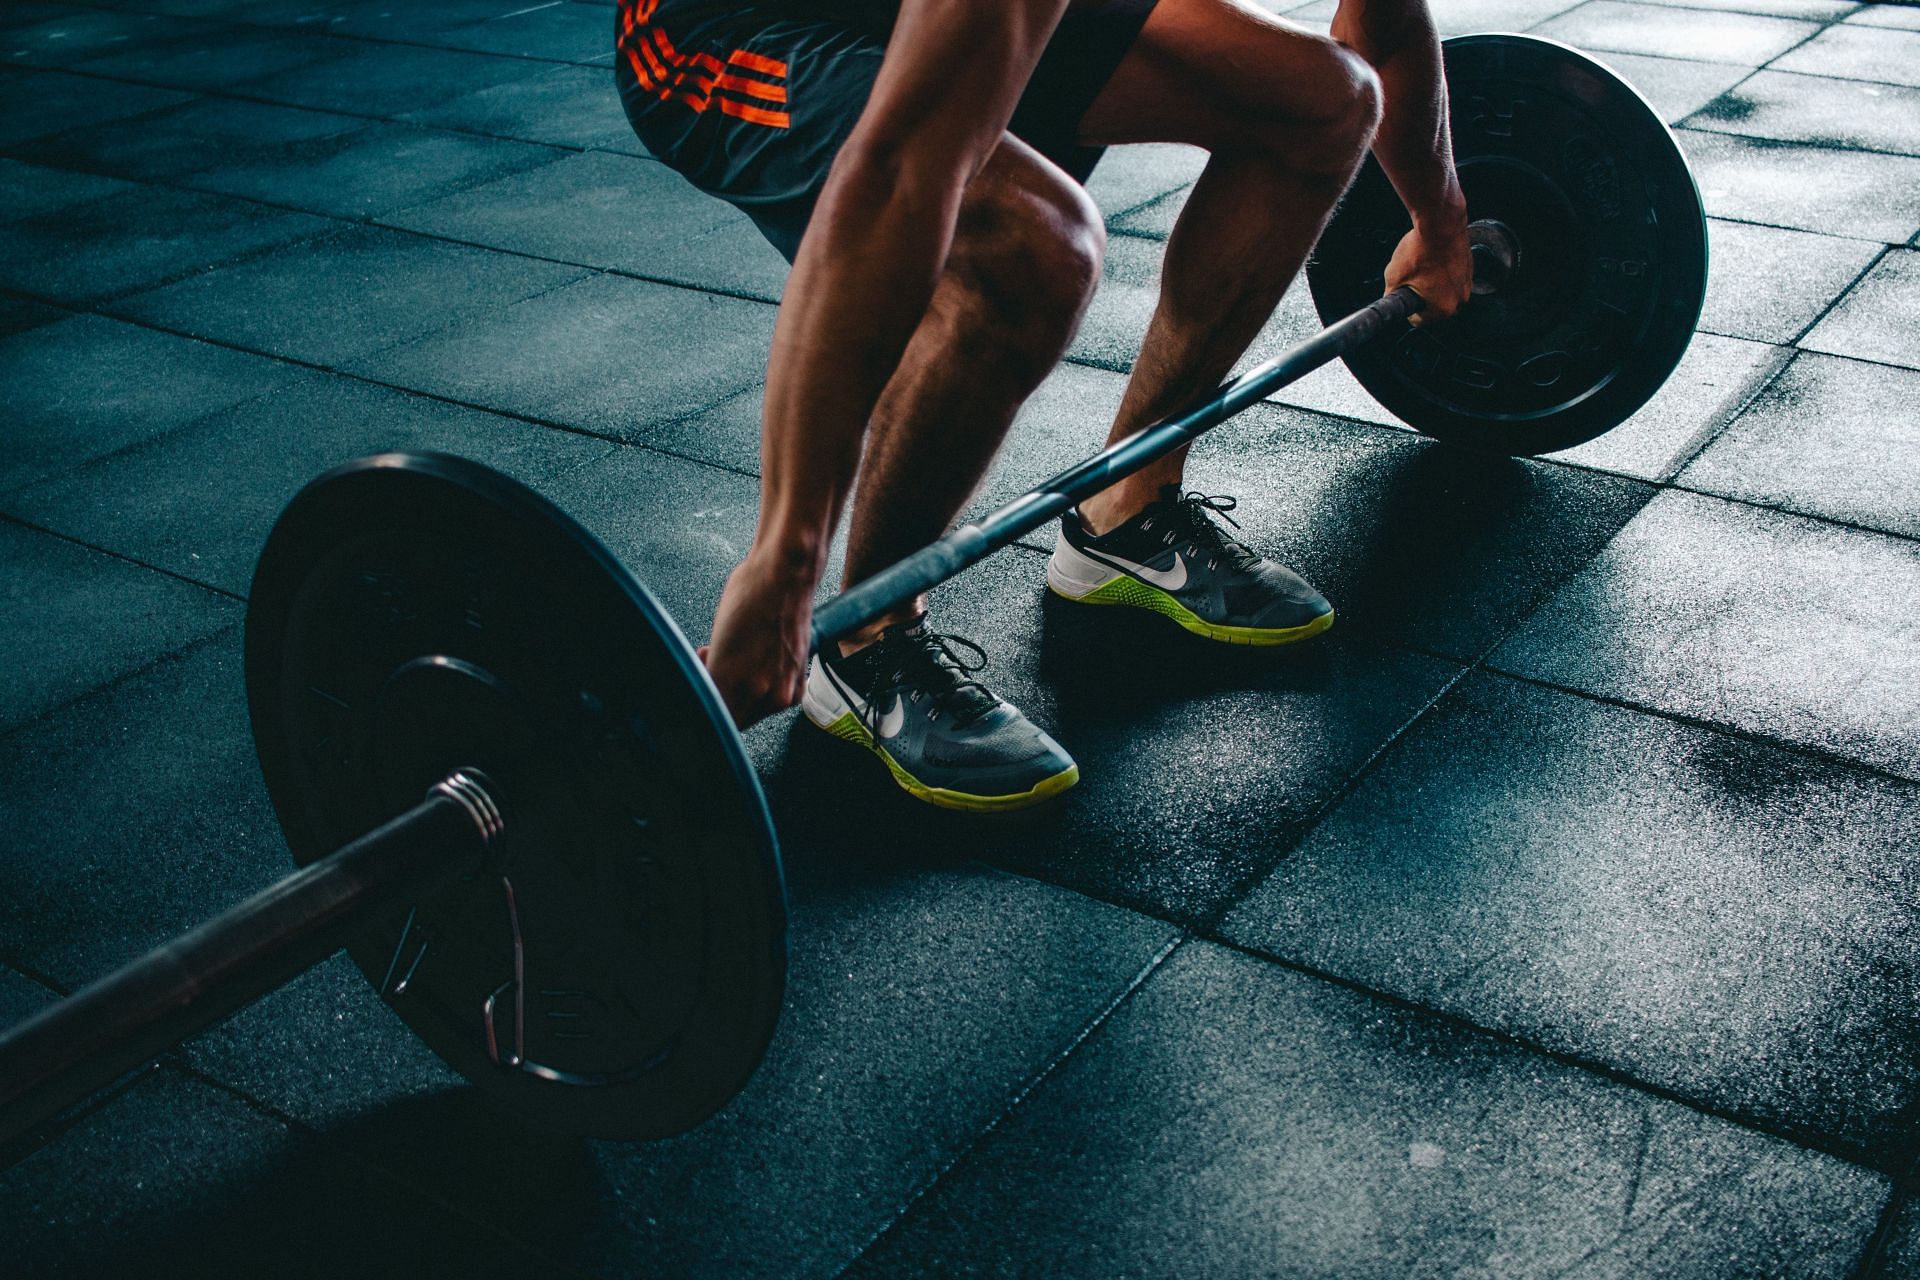 These are the best functional exercises you can do for incredible gains! (Image via unsplash/Victor Freitas)